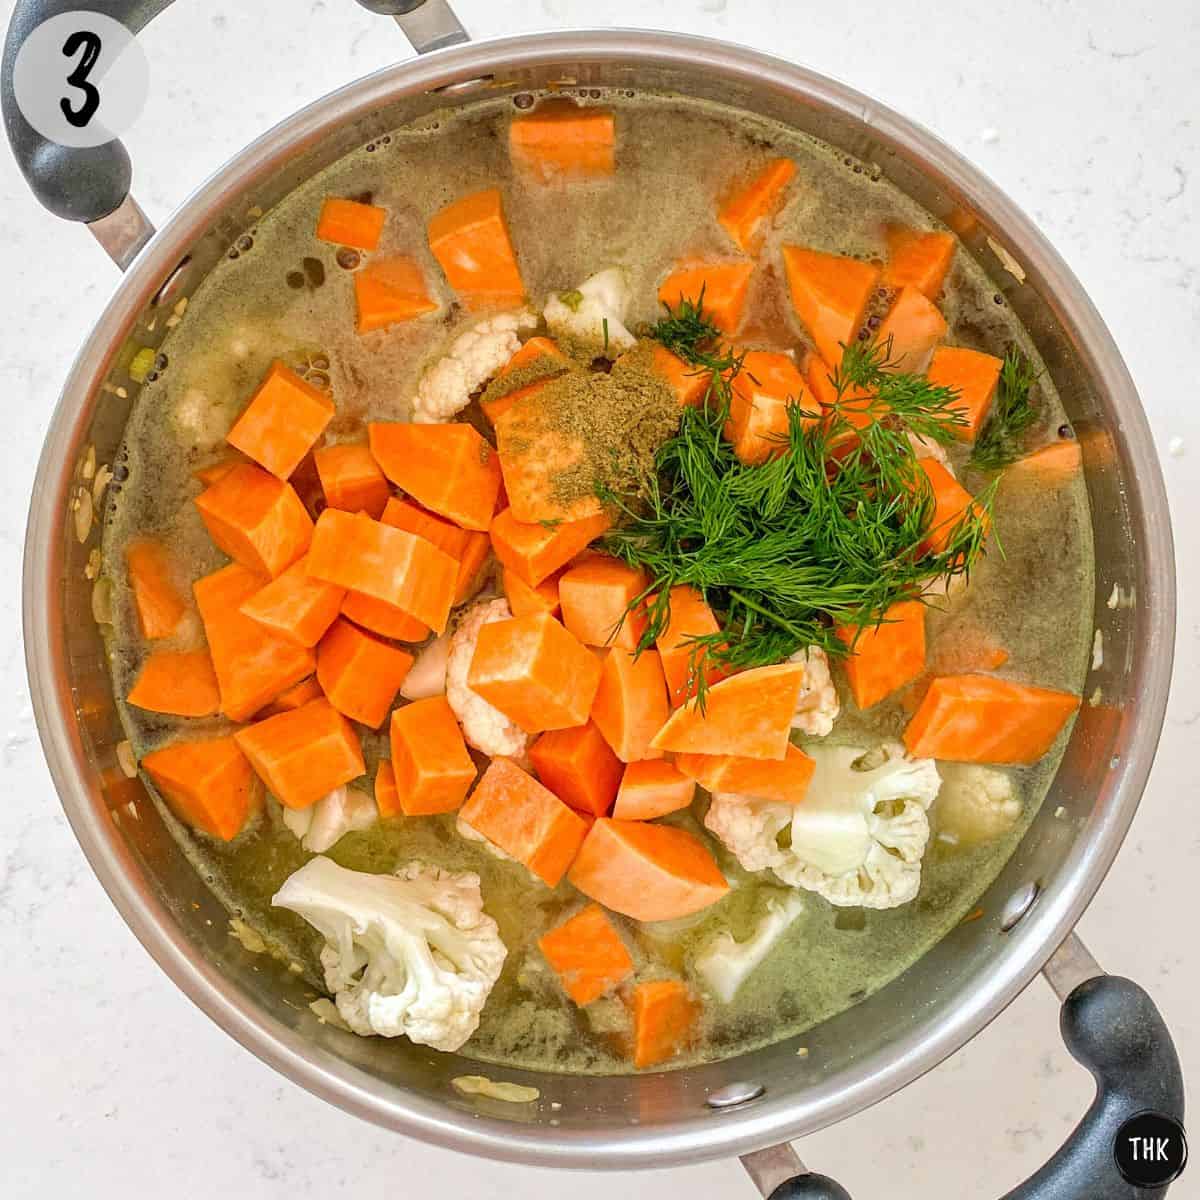 Soup pot with broth, cubed sweet potato, cauliflower, carrots, and spices inside.